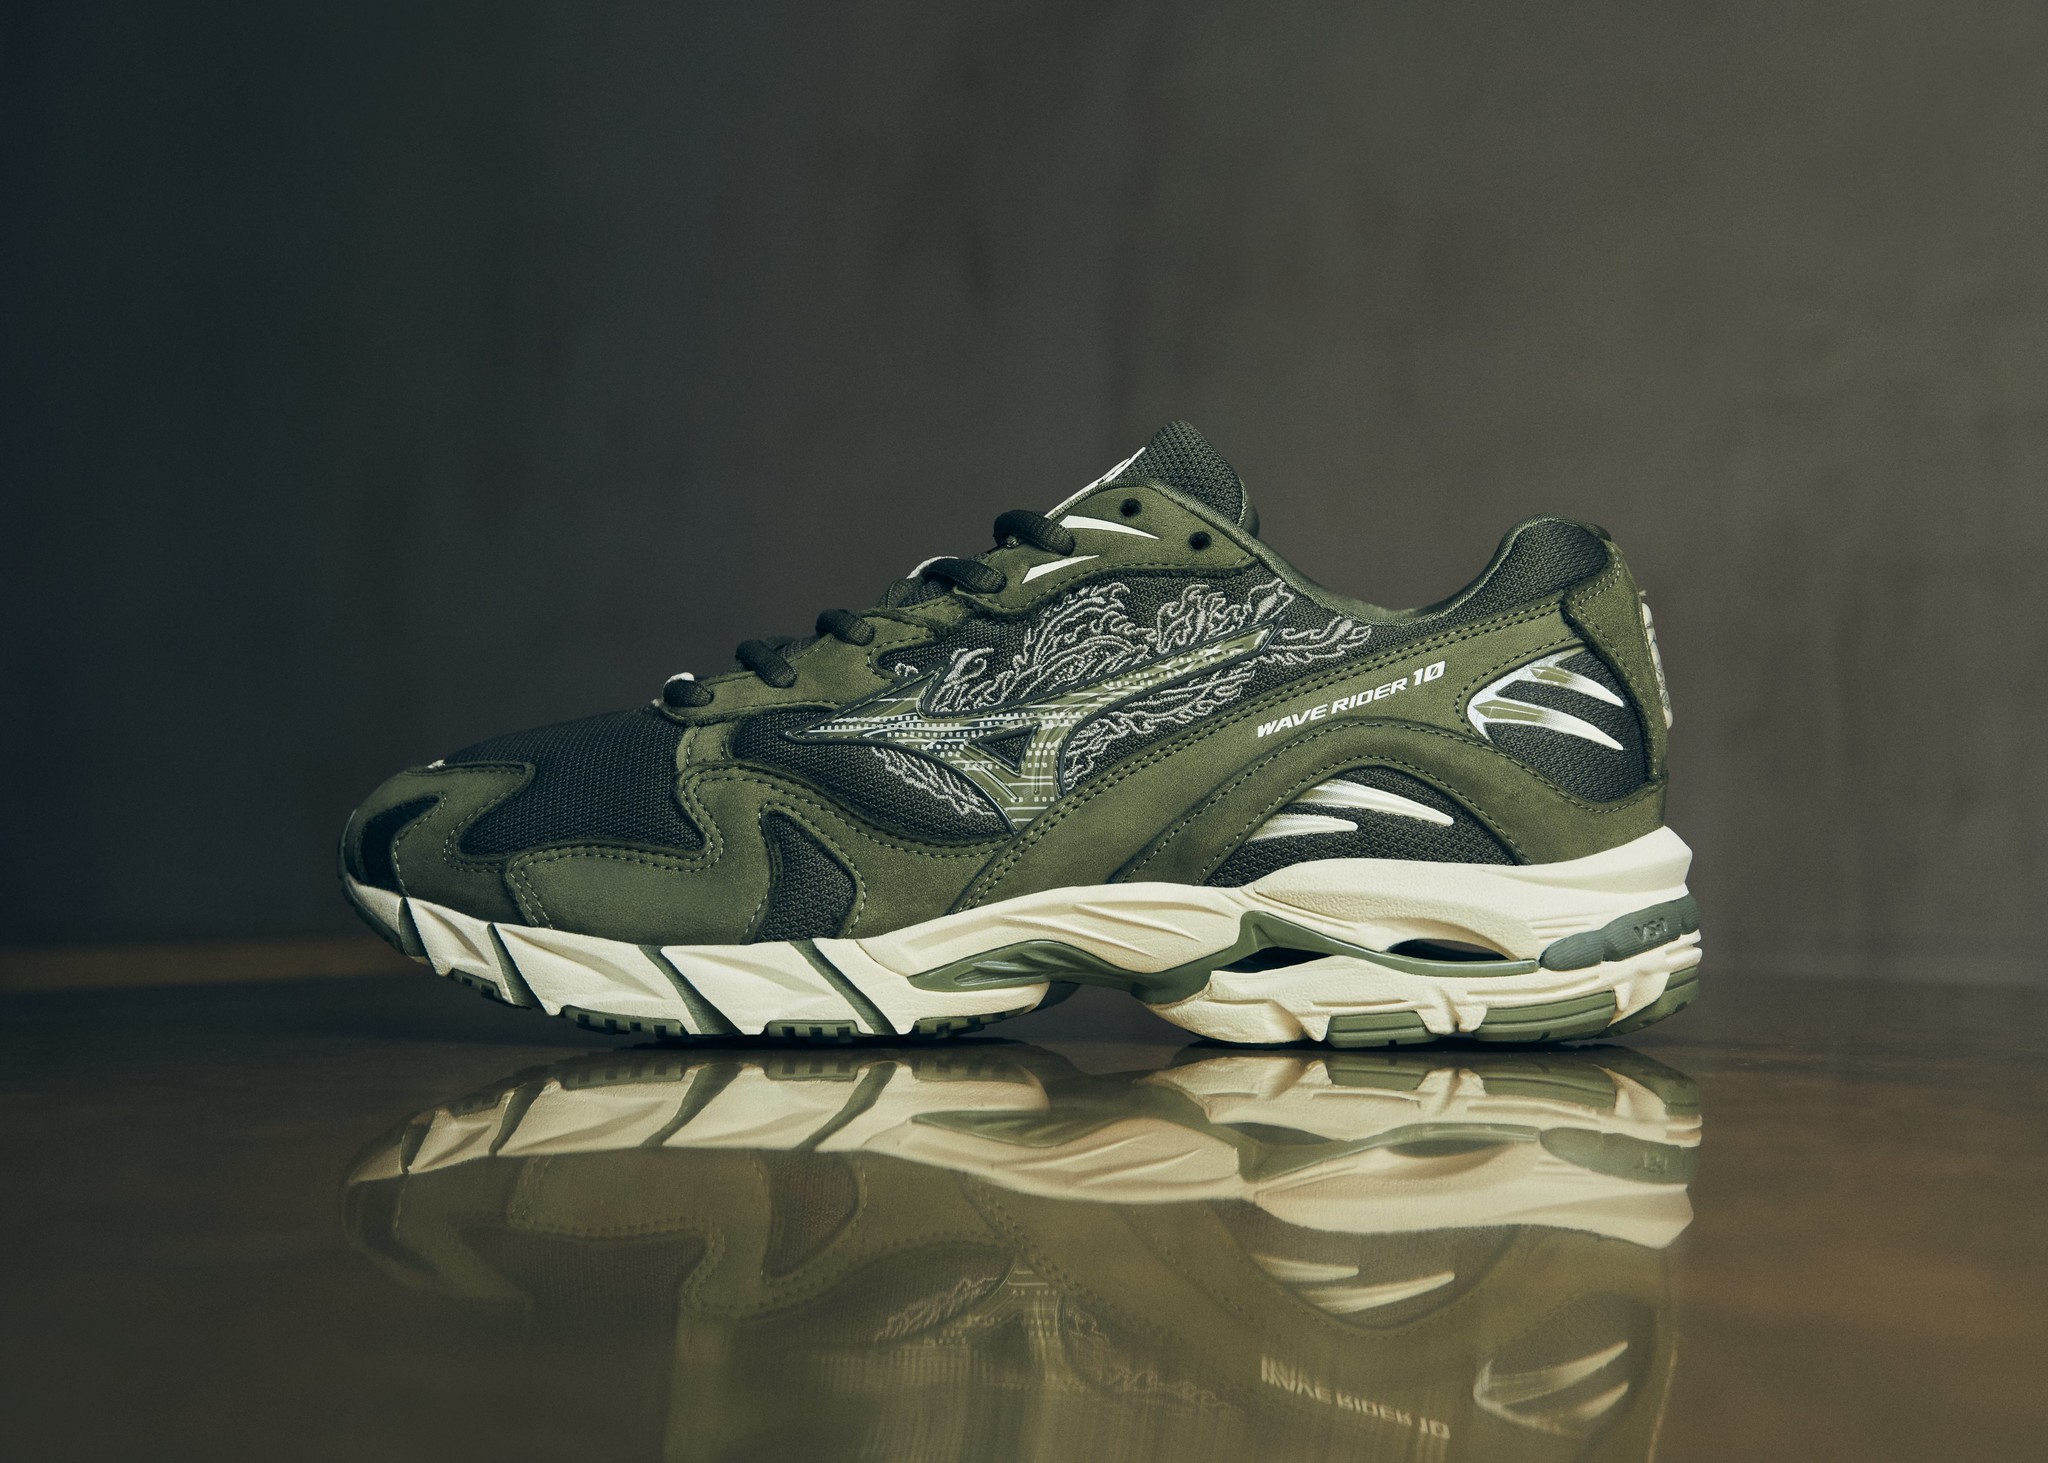 The extremely limited drop from Maharishi X Mizuno 'Fire Phoenix' Wave Rider 10